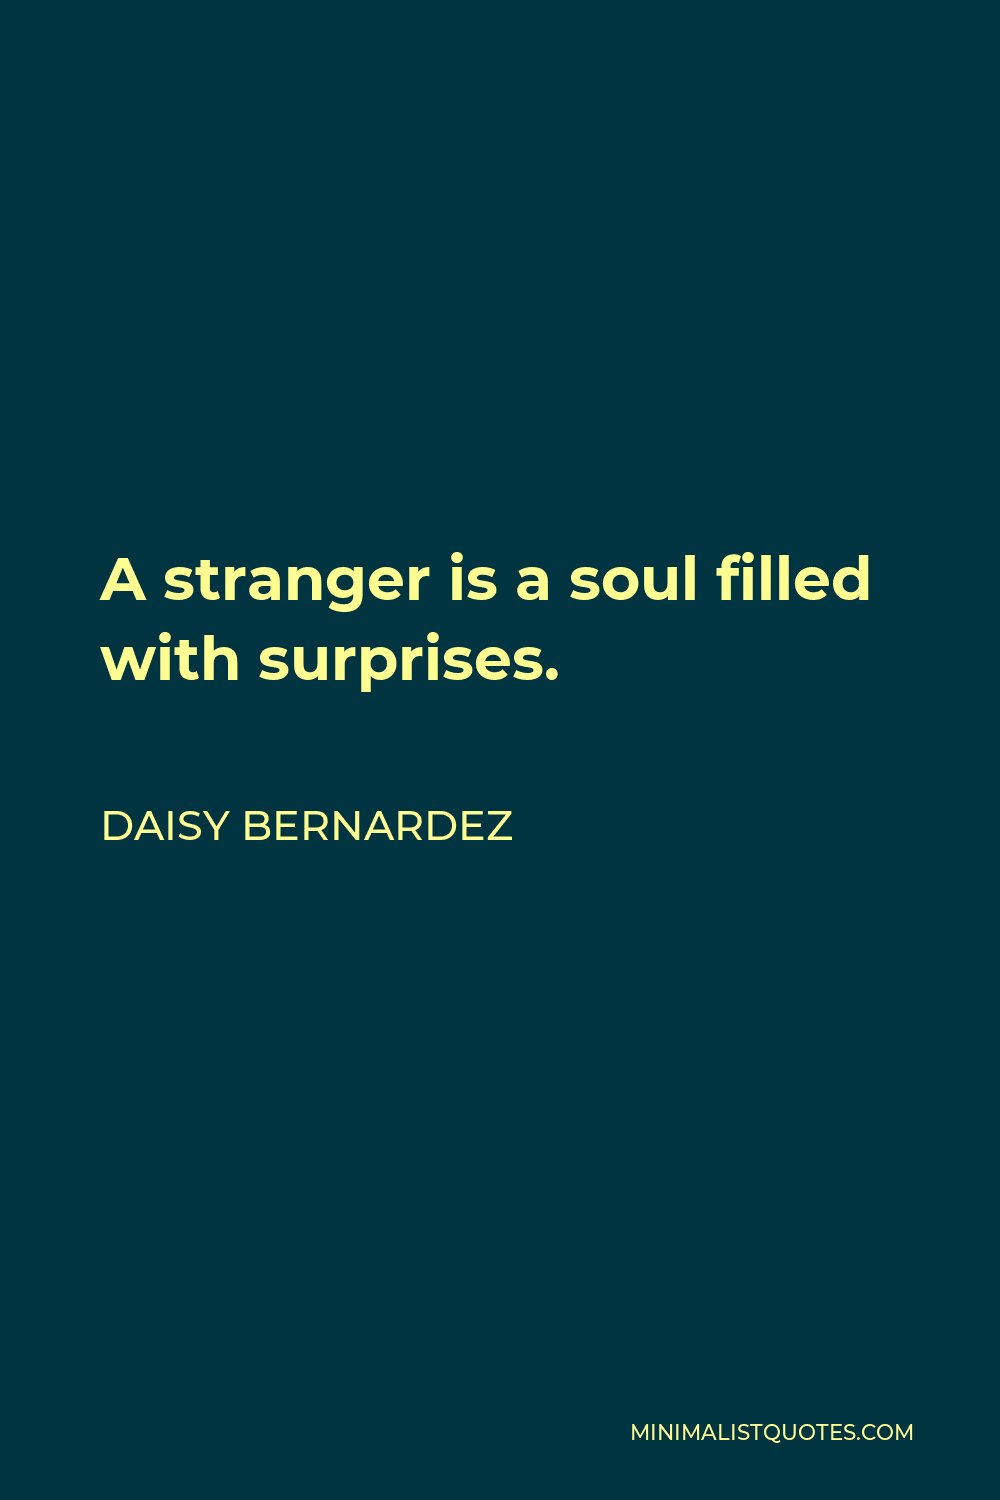 Daisy Bernardez Quote - A stranger is a soul filled with surprises.